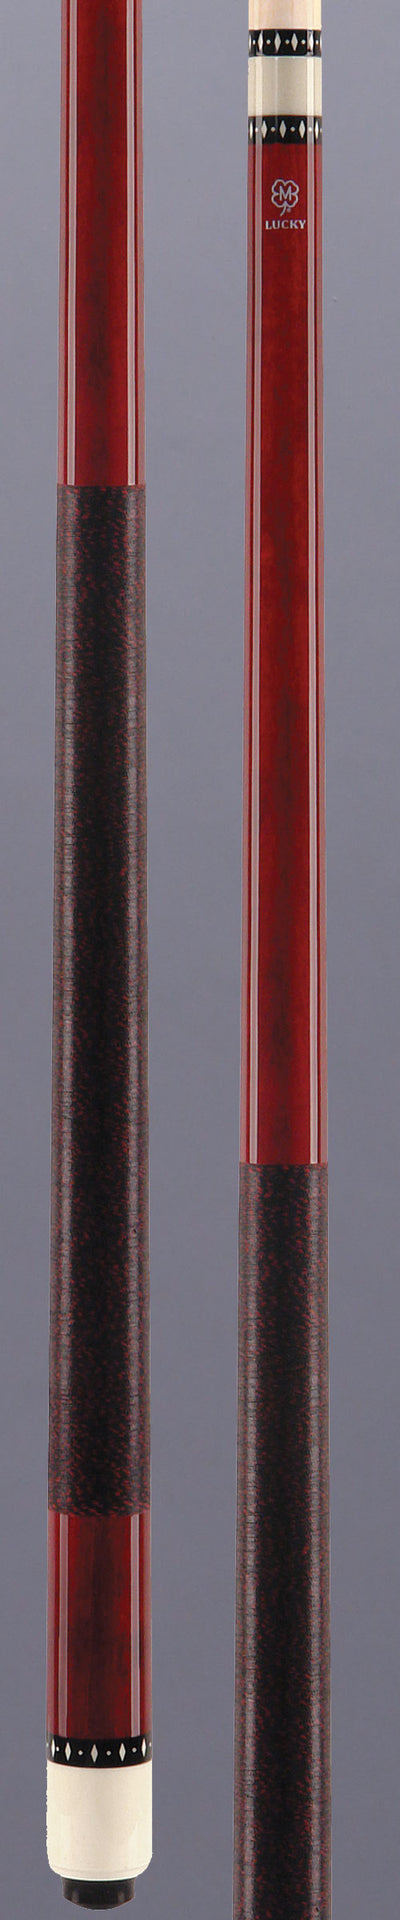 Lucky L6 Red Linen Wrap Cue